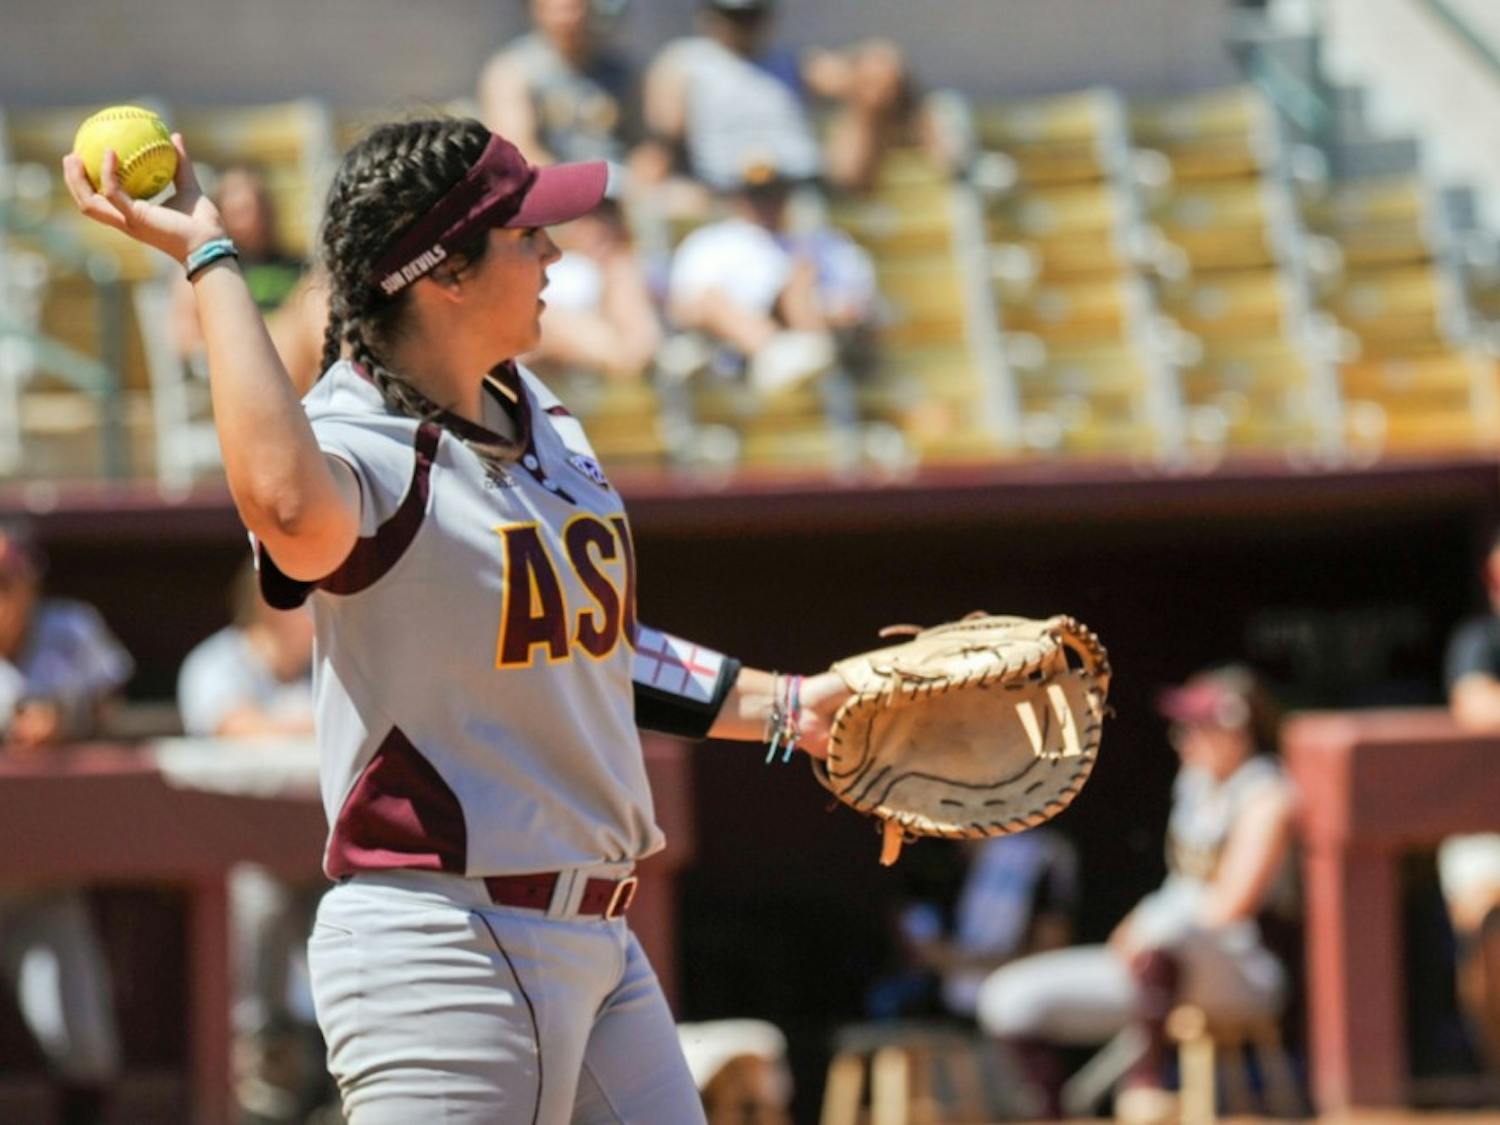 Sophomore infielder Margaret Stahm return the ball to the mound following the play at first against Texas Tech on Saturday, March 26, 2016, at Farrington Stadium in Tempe, Arizona.